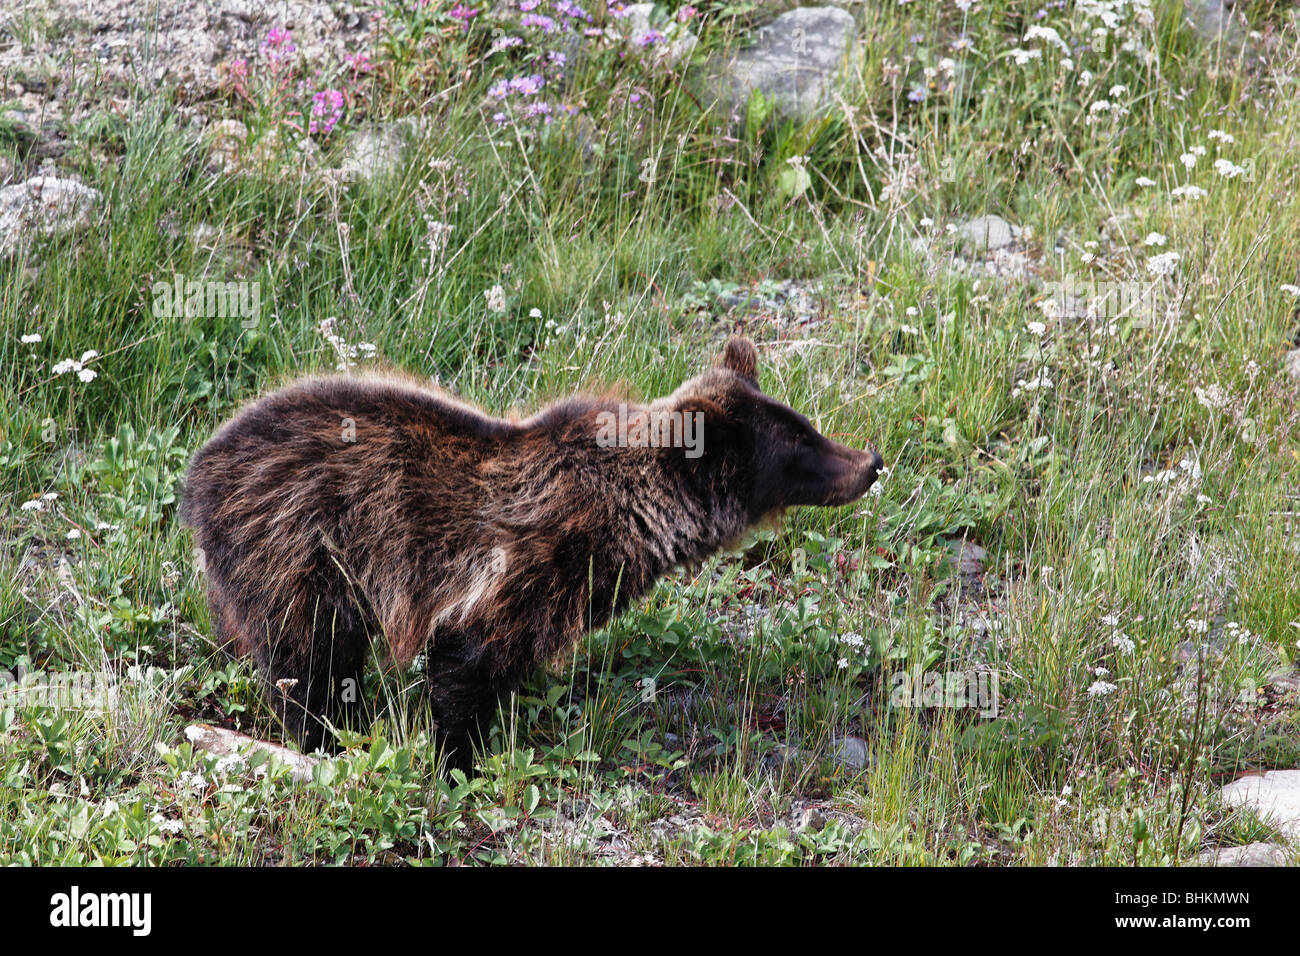 Young Grizzly Bear on an Alpine Meadow, Alberta, Canada Stock Photo